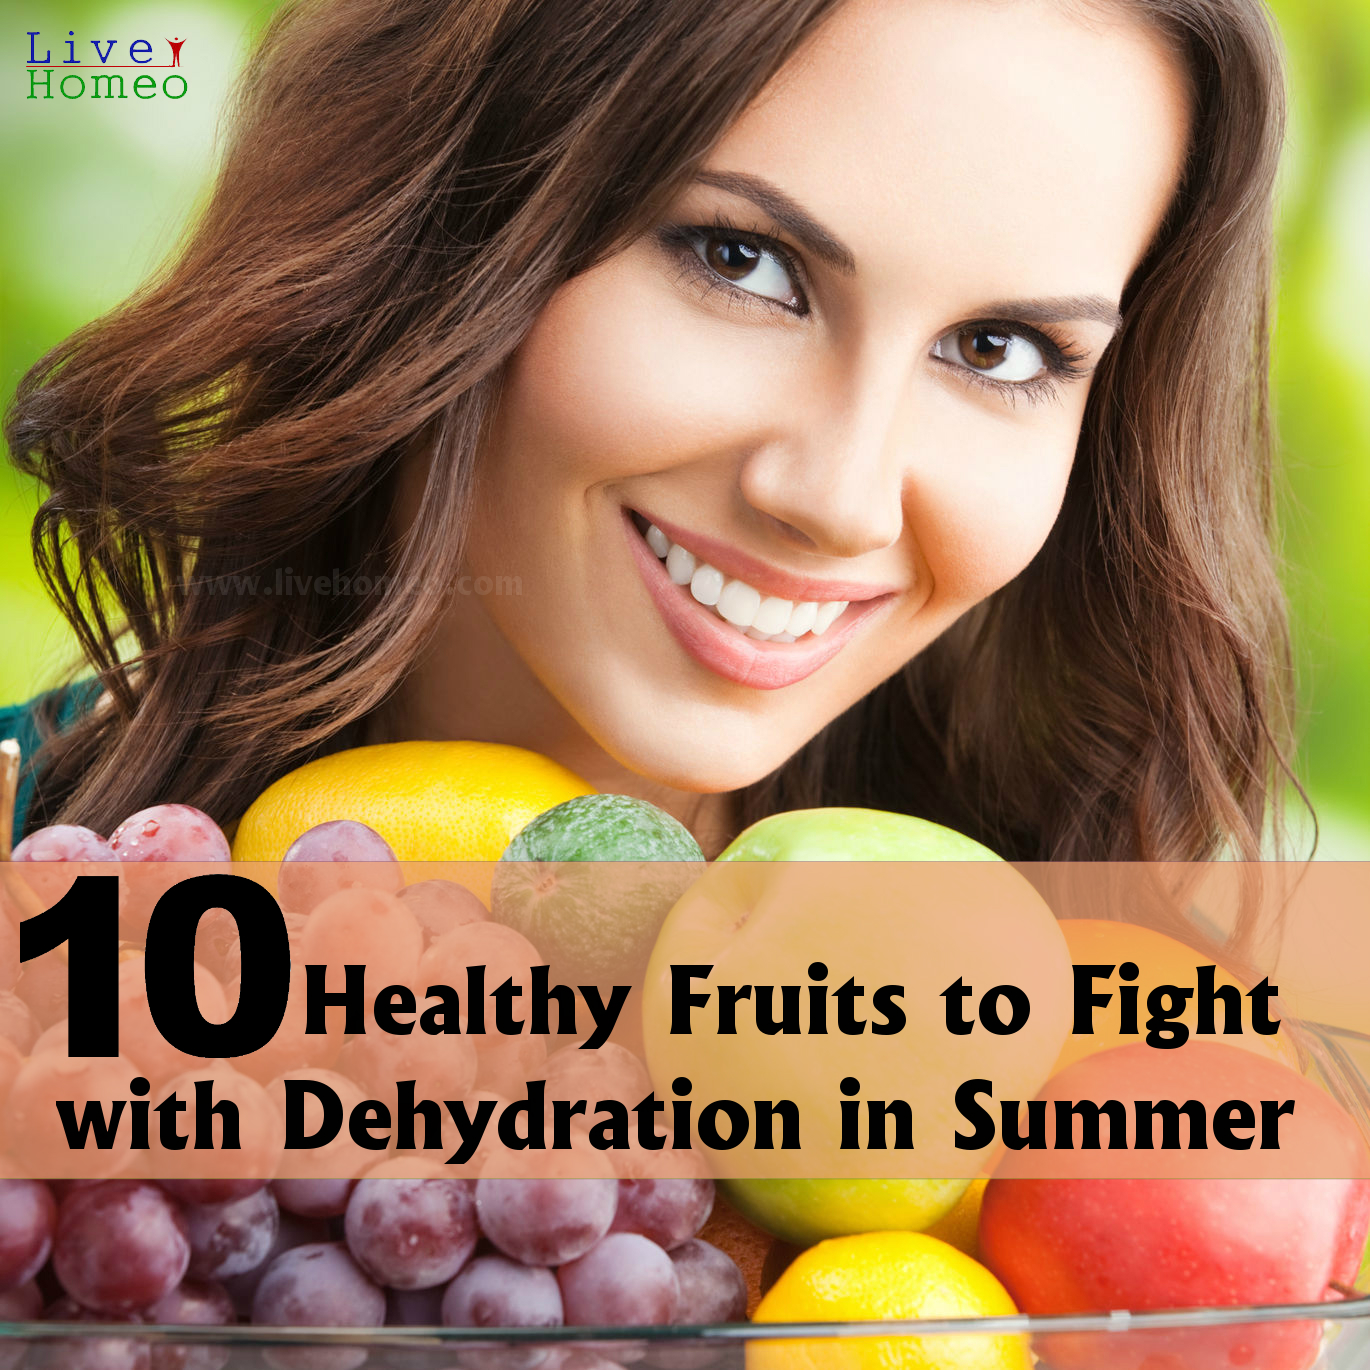 10 Healthy Fruits to Fight with Dehydration in Summer